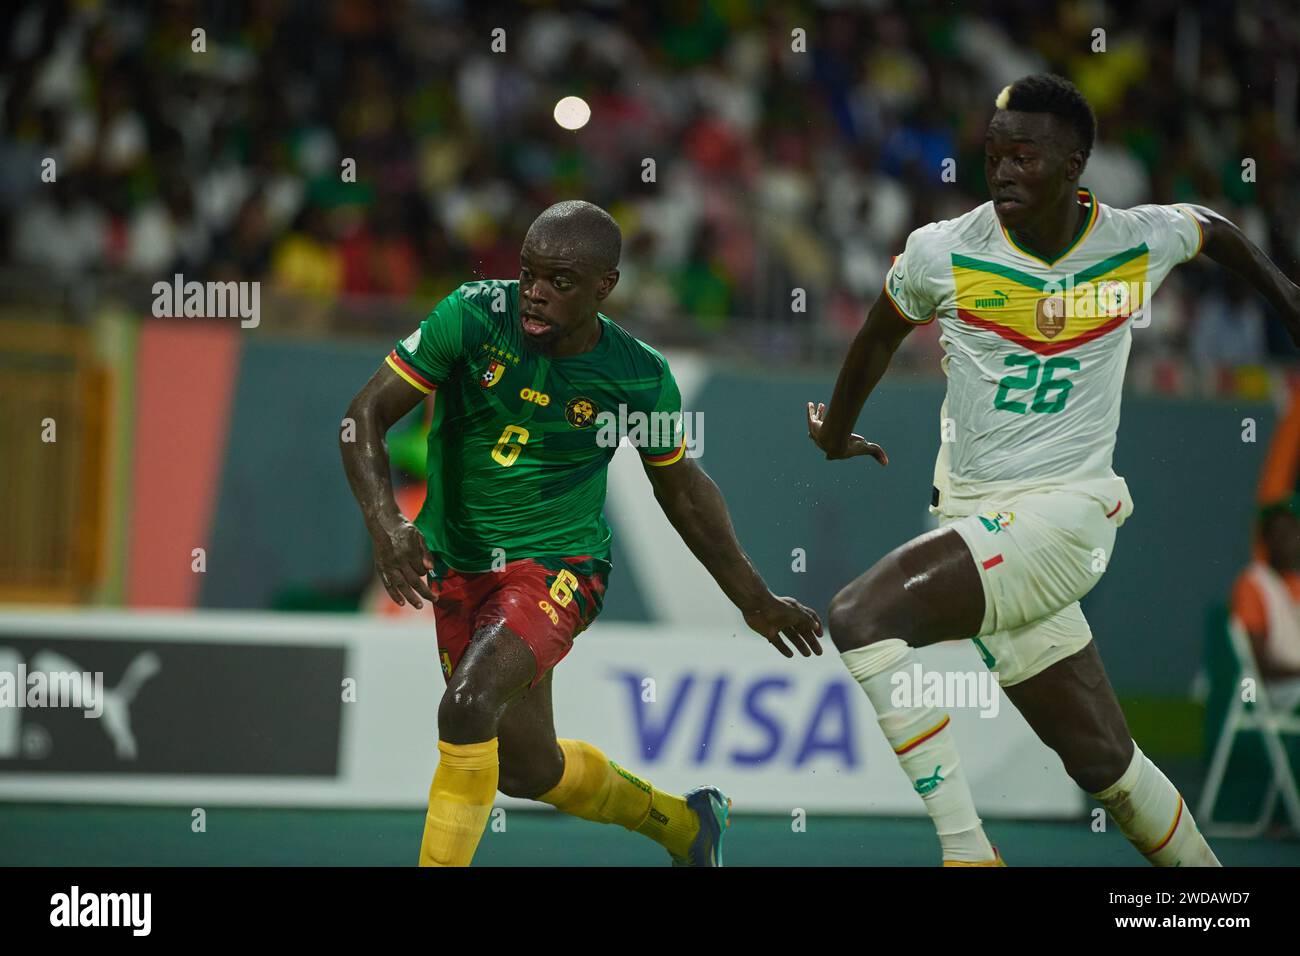 Highlights of the match between Senegal and Cameroon at the Africa Cup of Nations 2023, Olivier Kemen under pressure from Pape Gueye Stock Photo